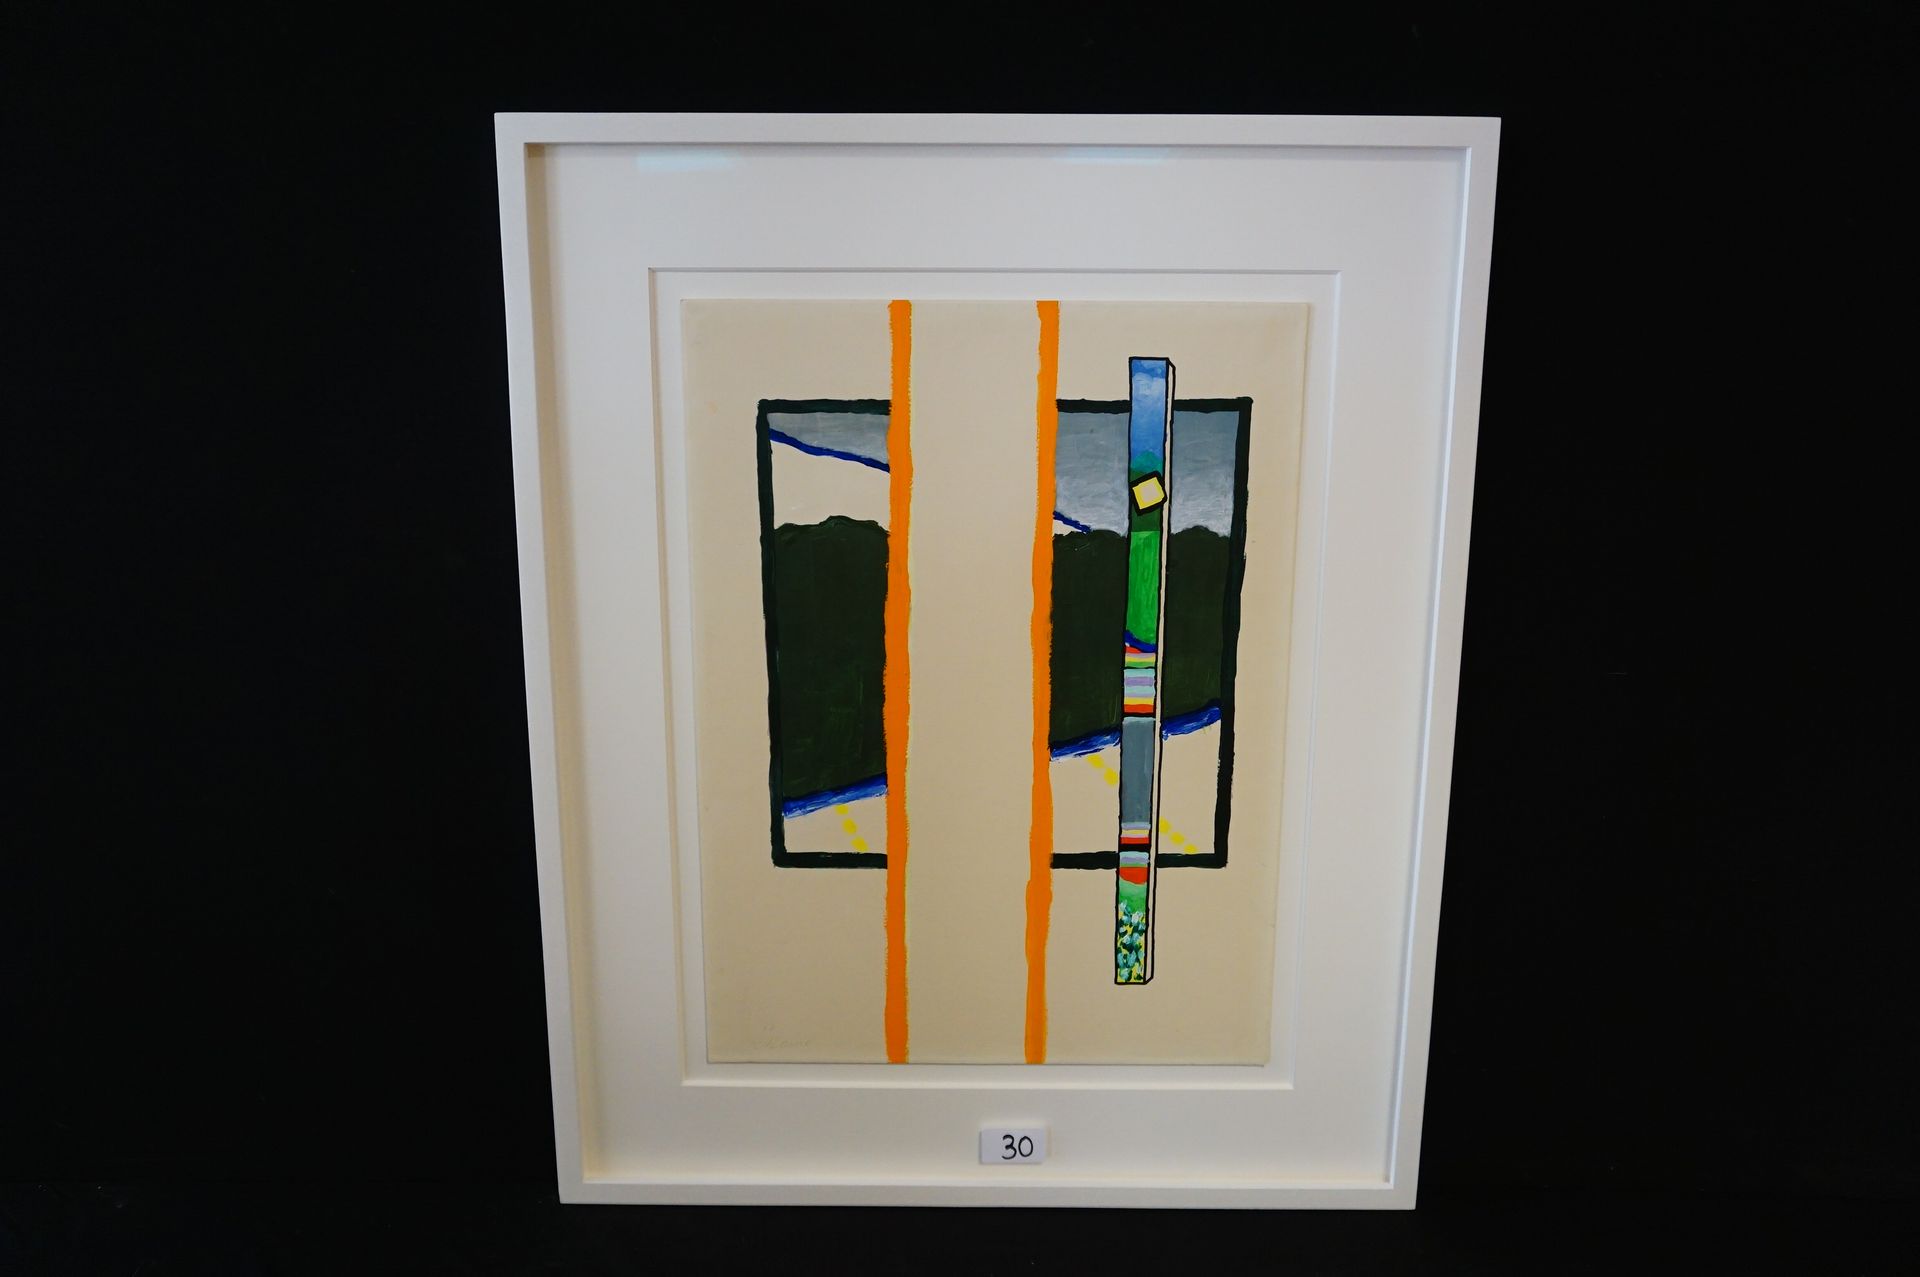 ROGER RAVEEL (1921 - 2013) "The pole of Bonheiden" - Acrylic and collage on pape&hellip;